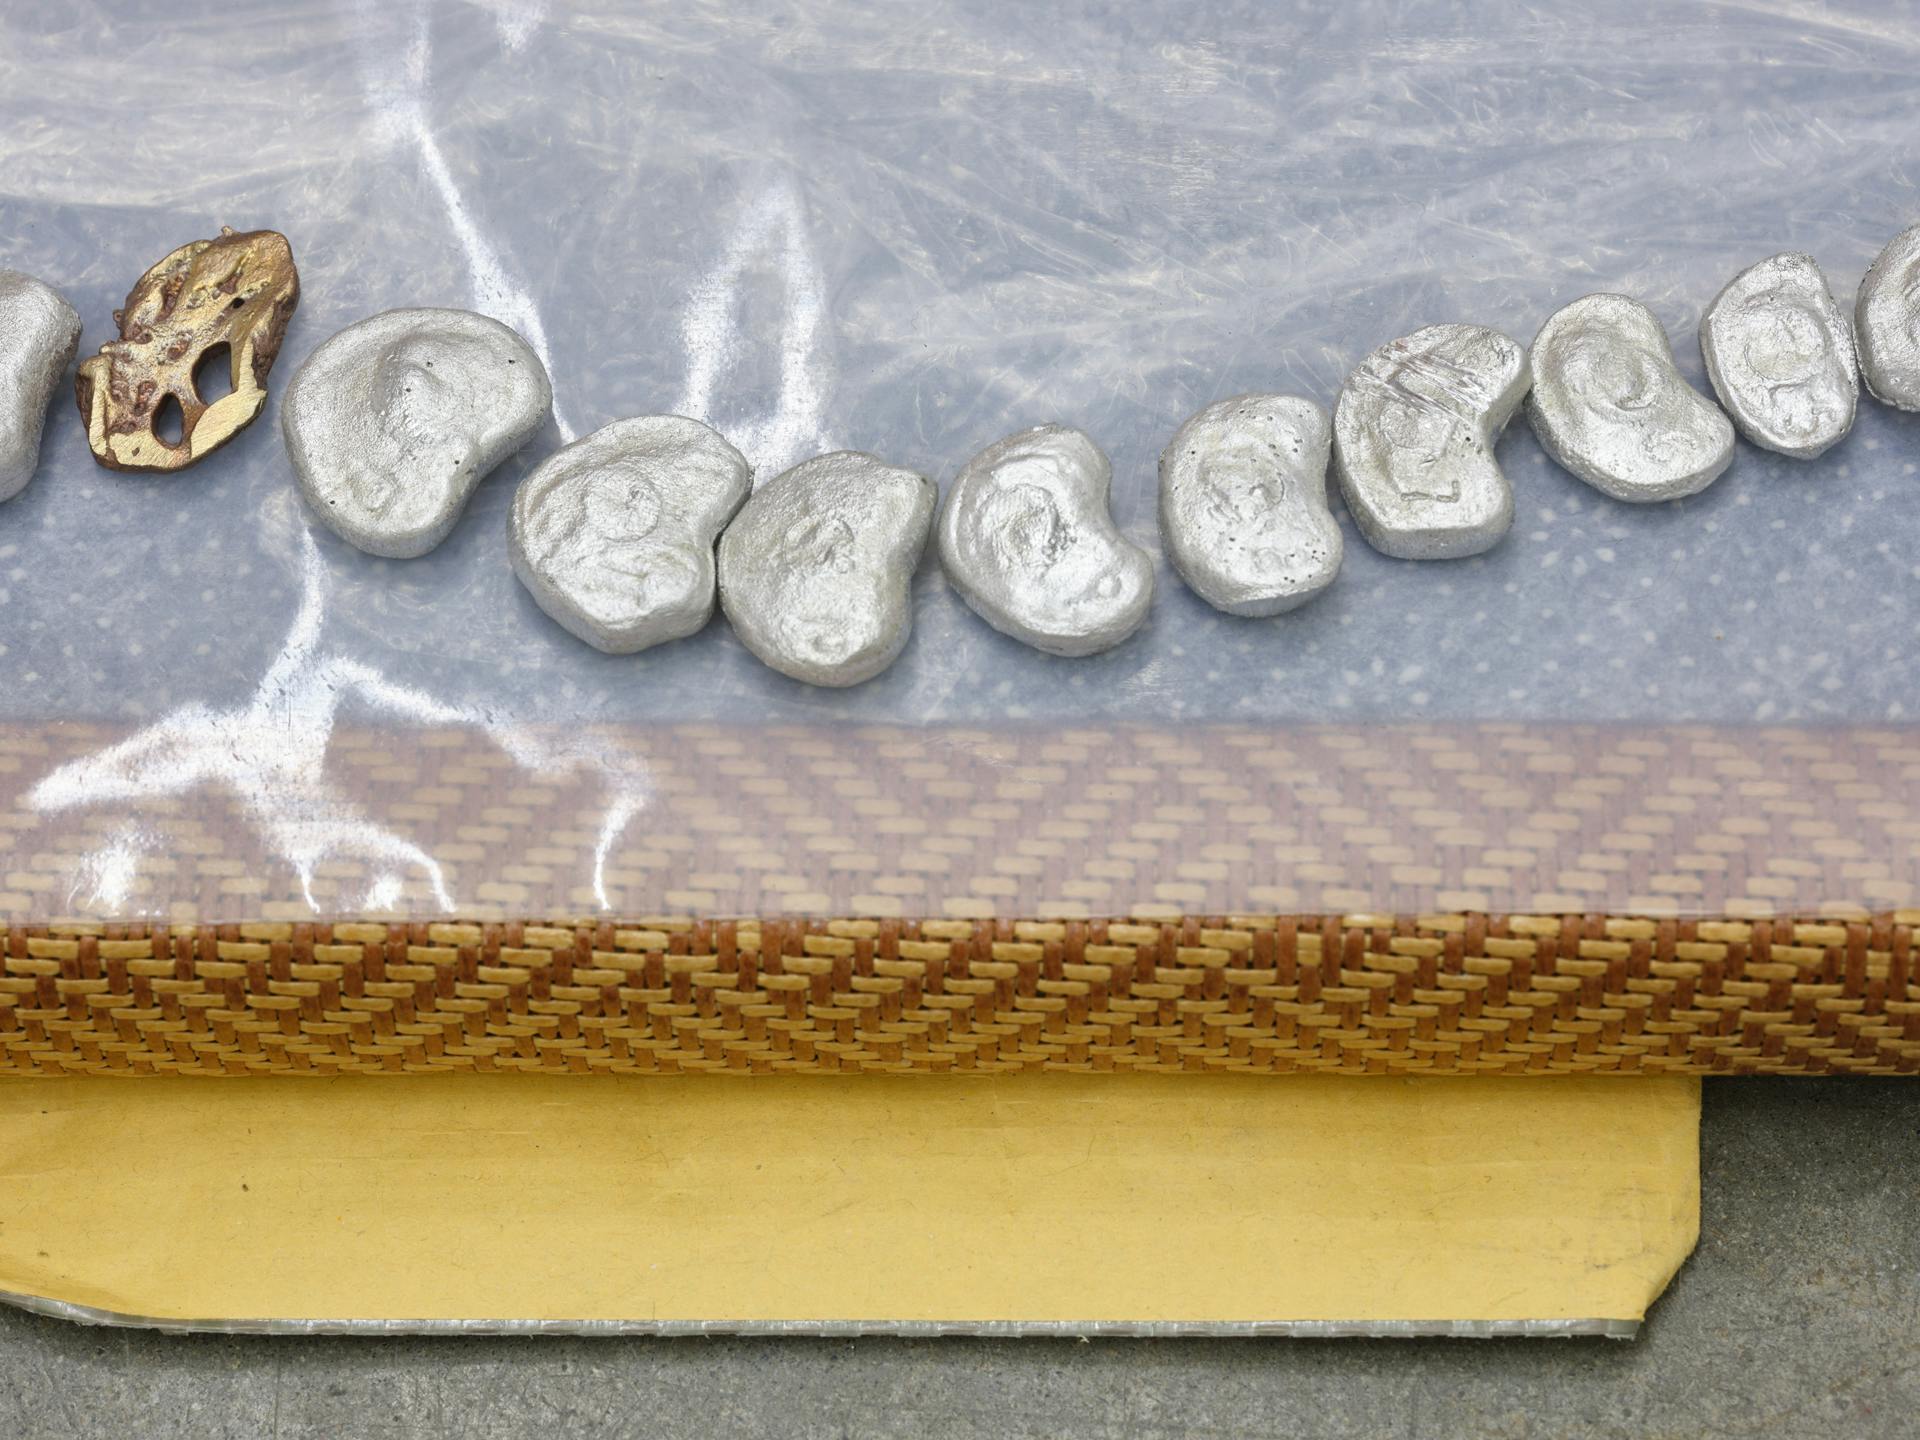 Detail view of a patterned tatami mat with one bronze and ten silver discs arranged in a curved line on its surface. The edge of a manila envelope is tucked underneath the mat.